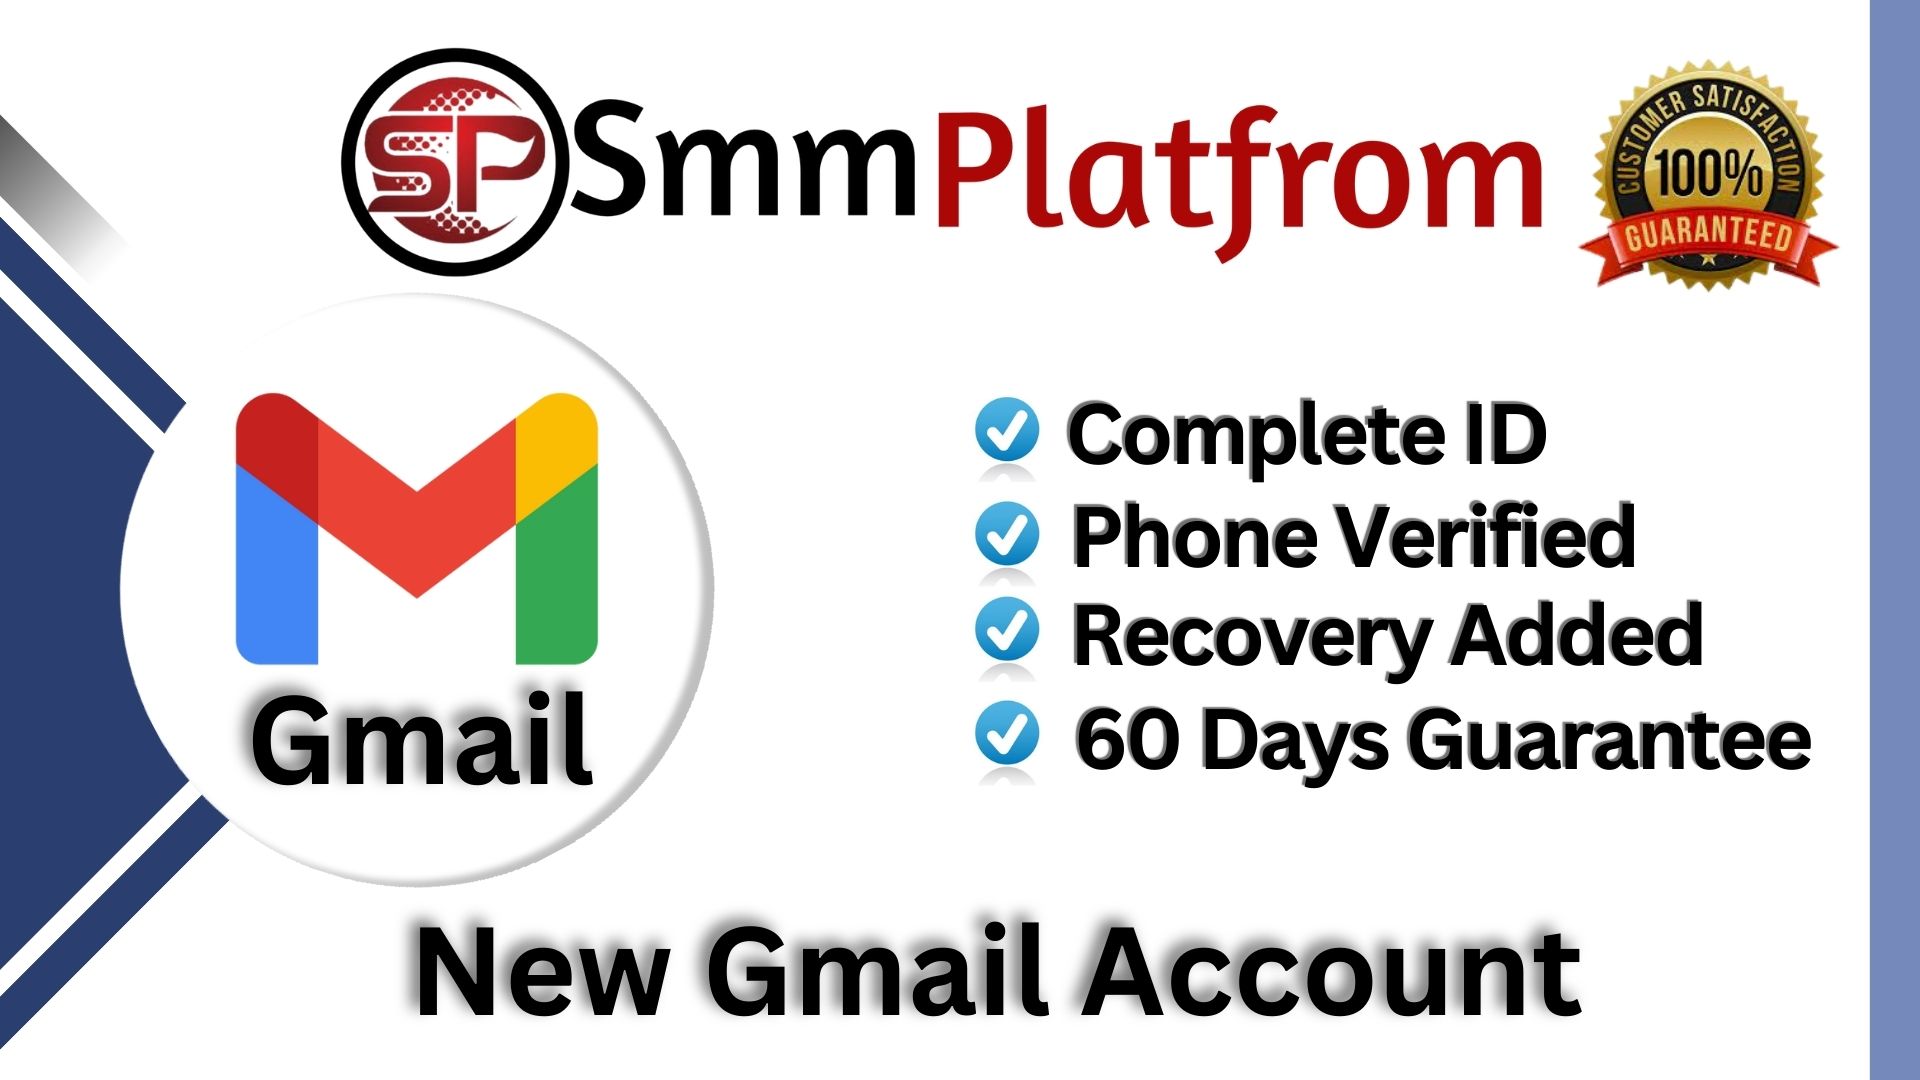 Buy Gmail Accounts - Instant Delivery New Gmail Accounts